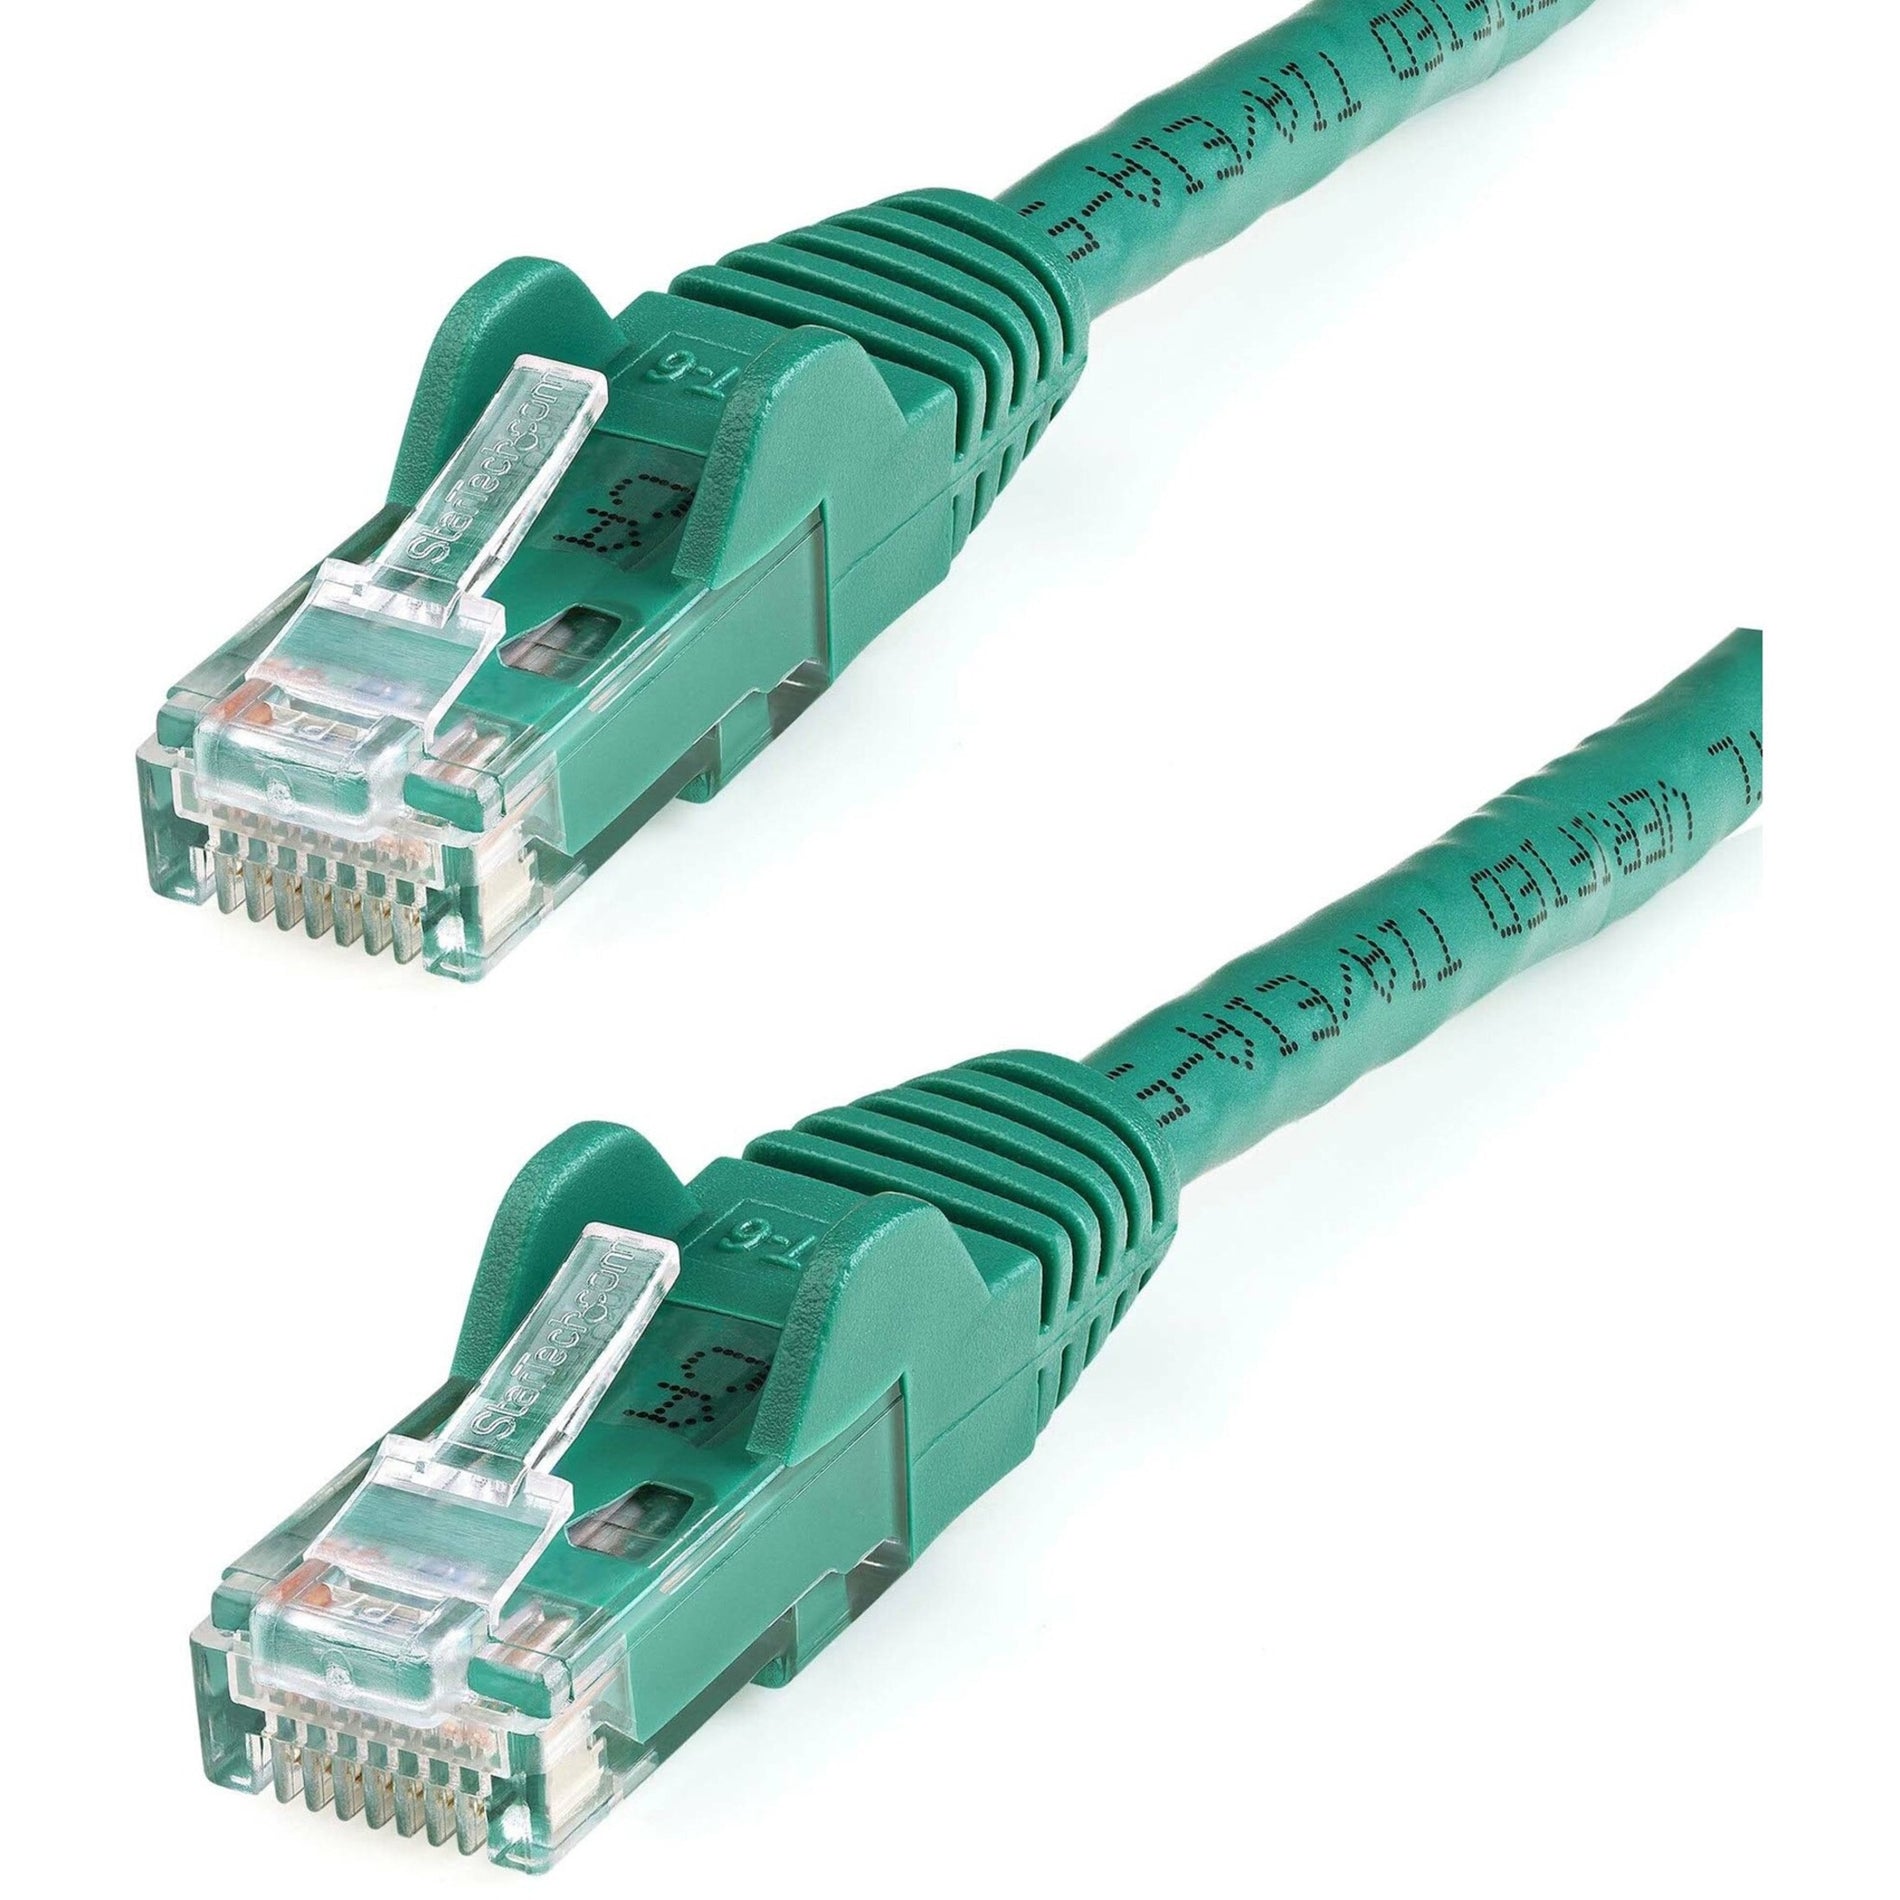 StarTech.com N6PATCH20GN Cat. 6 Network Cable, 20ft Green Ethernet Cable, Snagless RJ45 Connectors